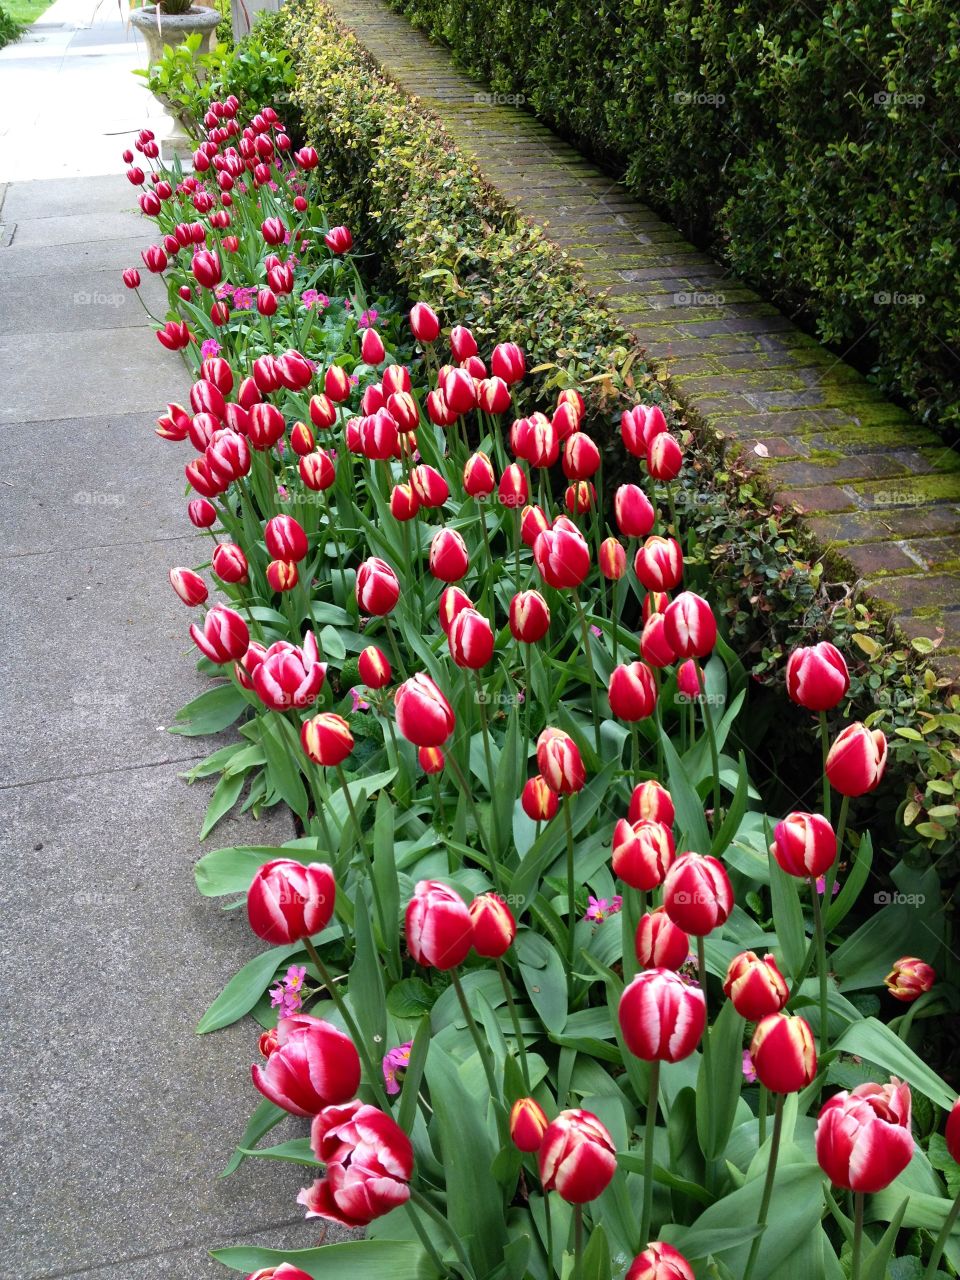 A street of tulips 